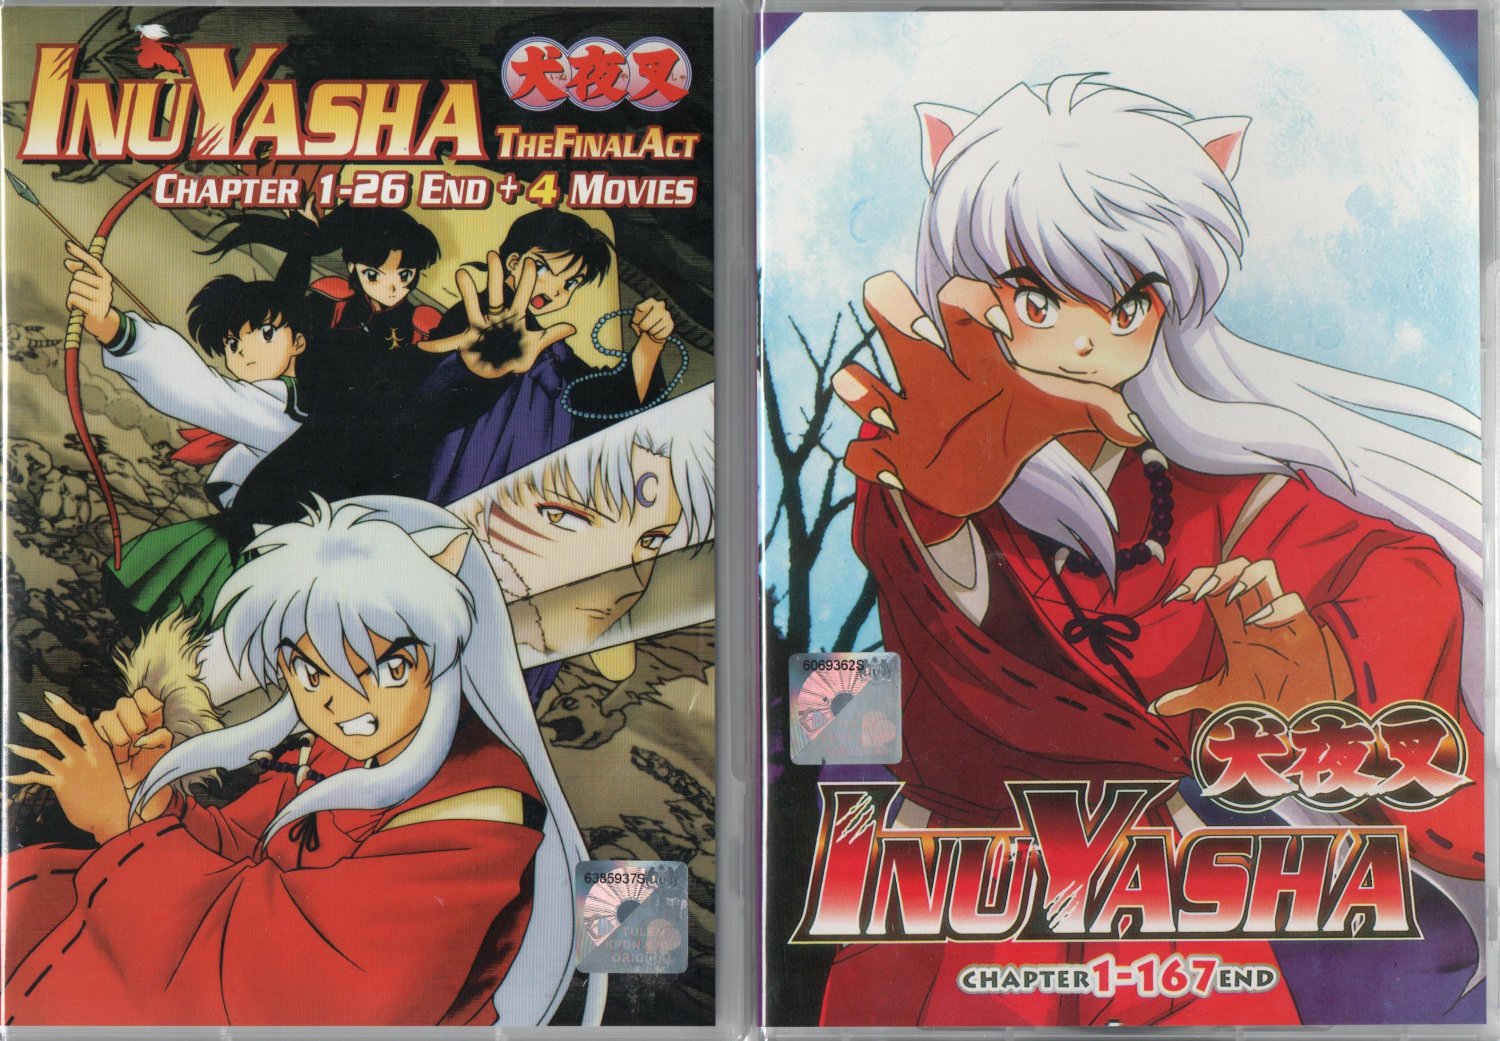 Anime DVD Inuyasha Complete Vol.1-167 End + Final Act Vol.1-26 + 4 Movie Eng Dub